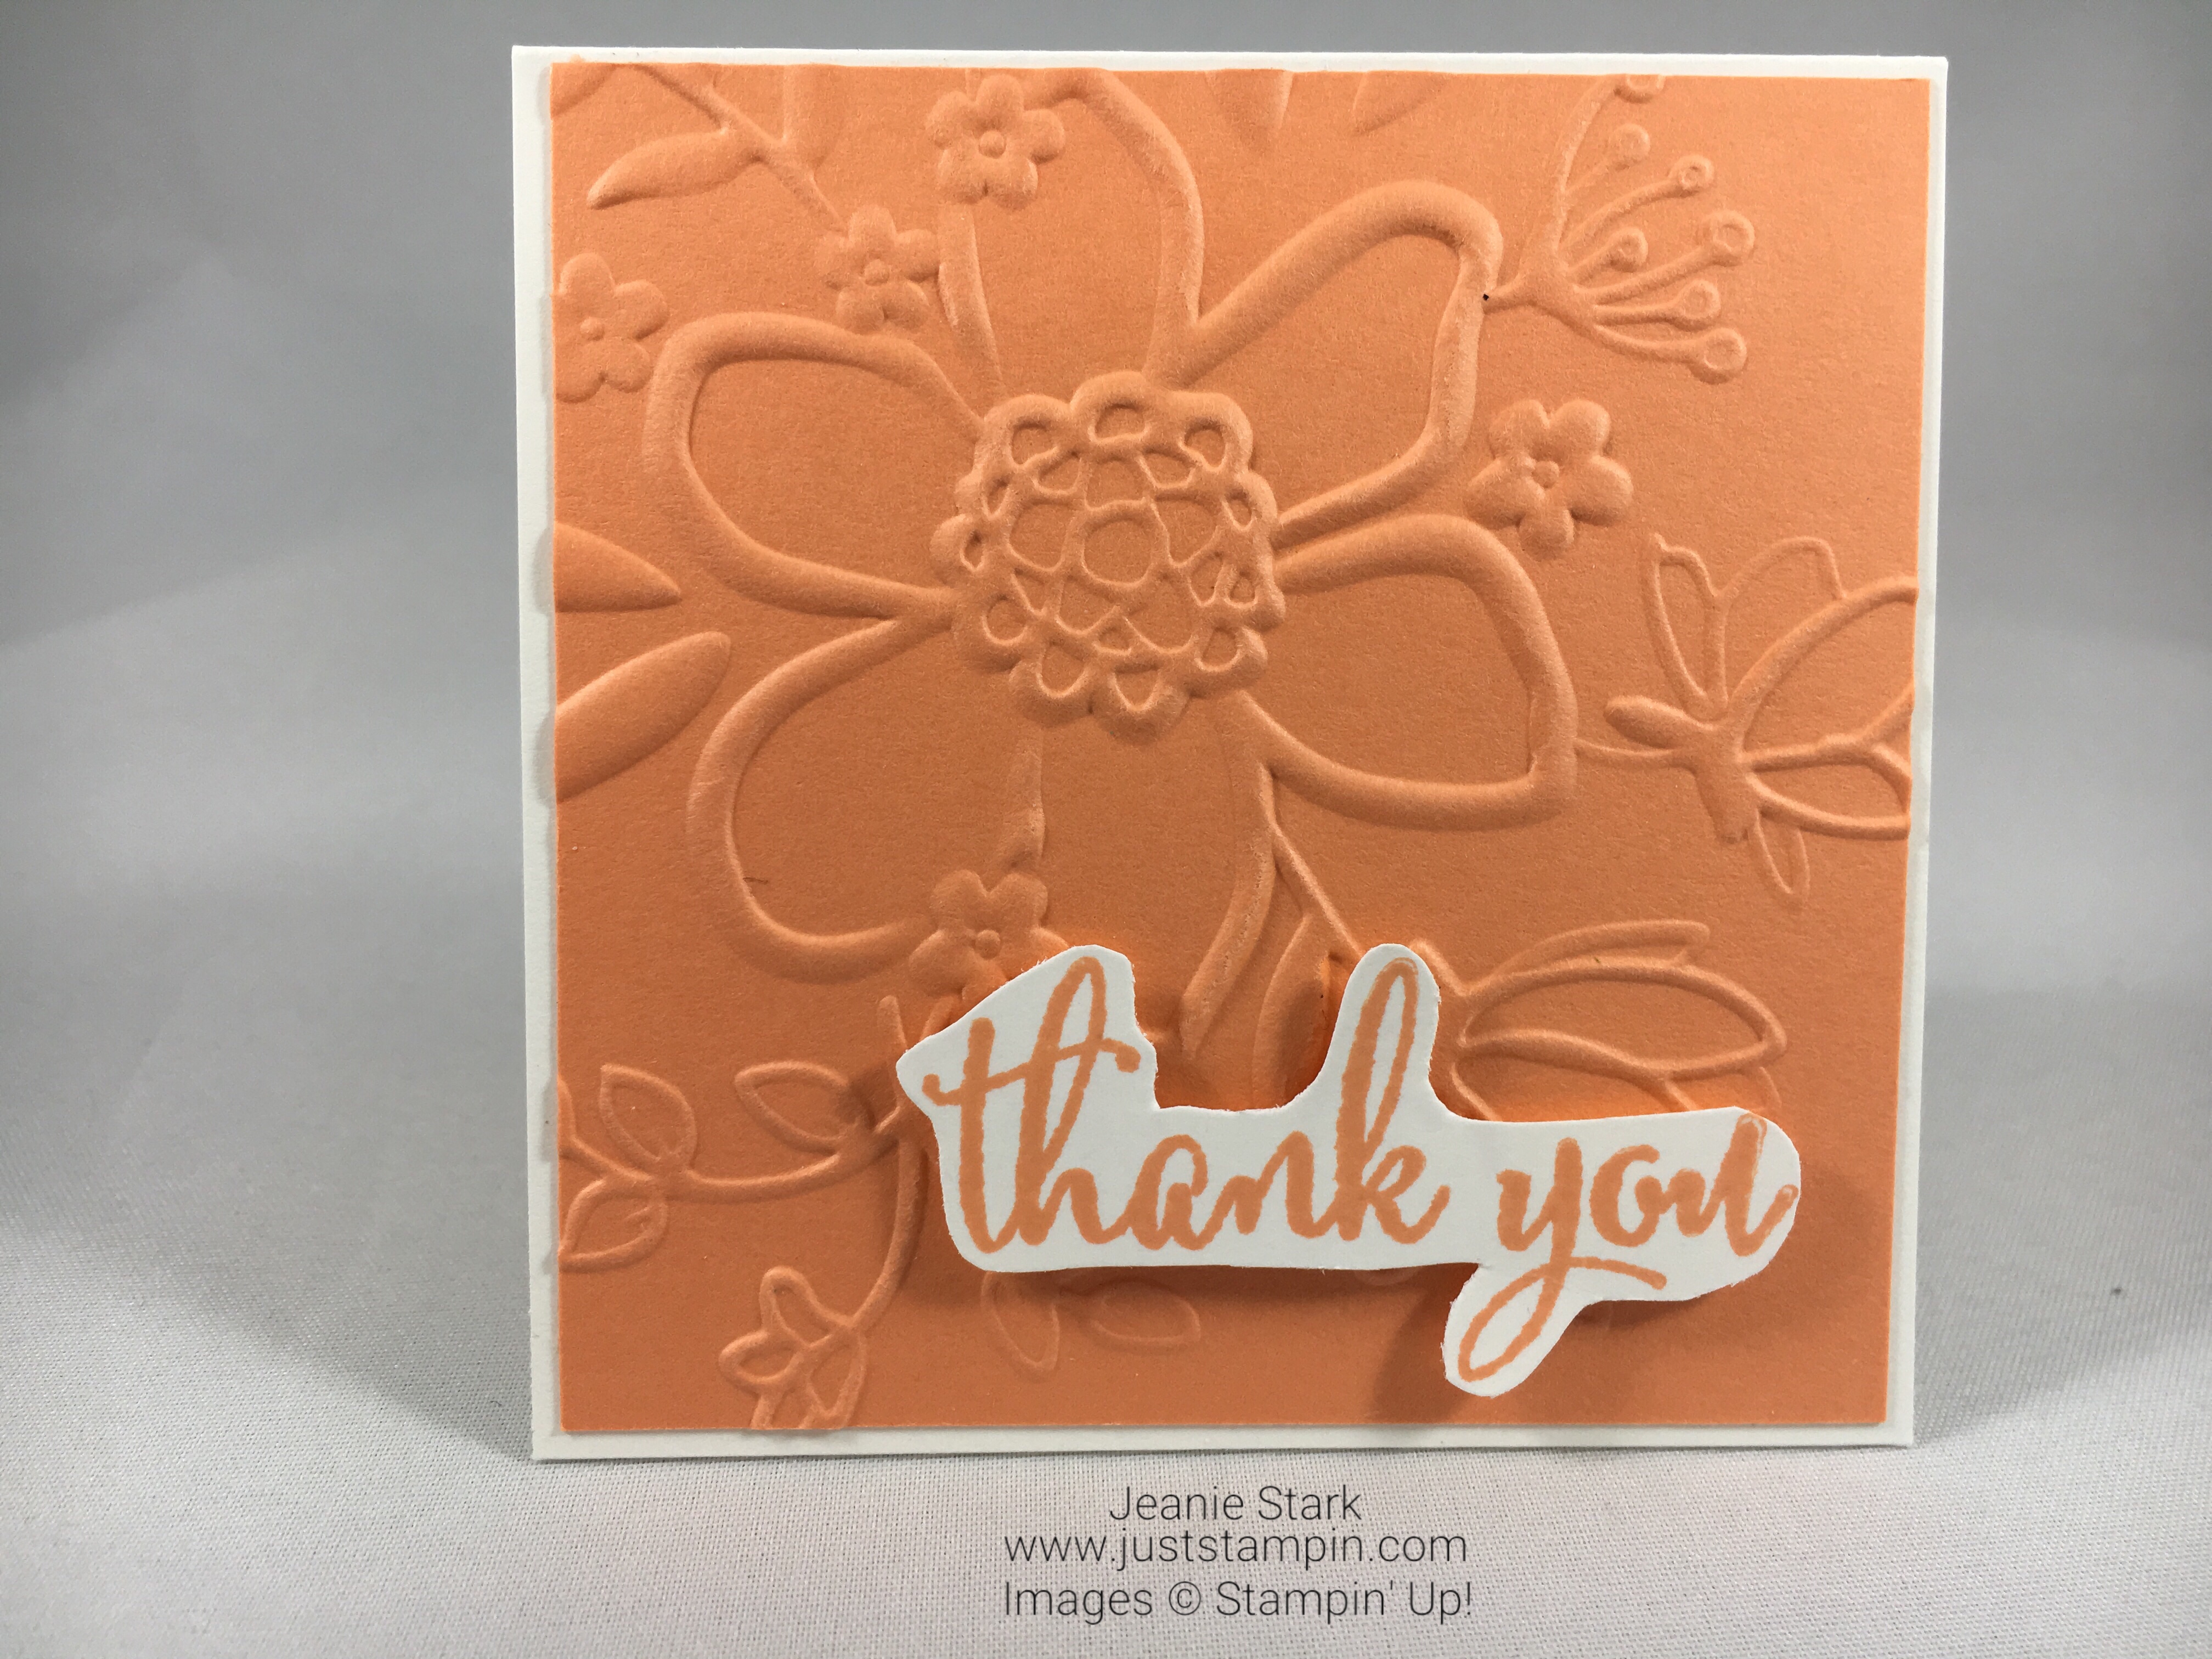 Stampin Up Lovely Floral In Color thank you note card idea - Jeanie Stark StampinUp